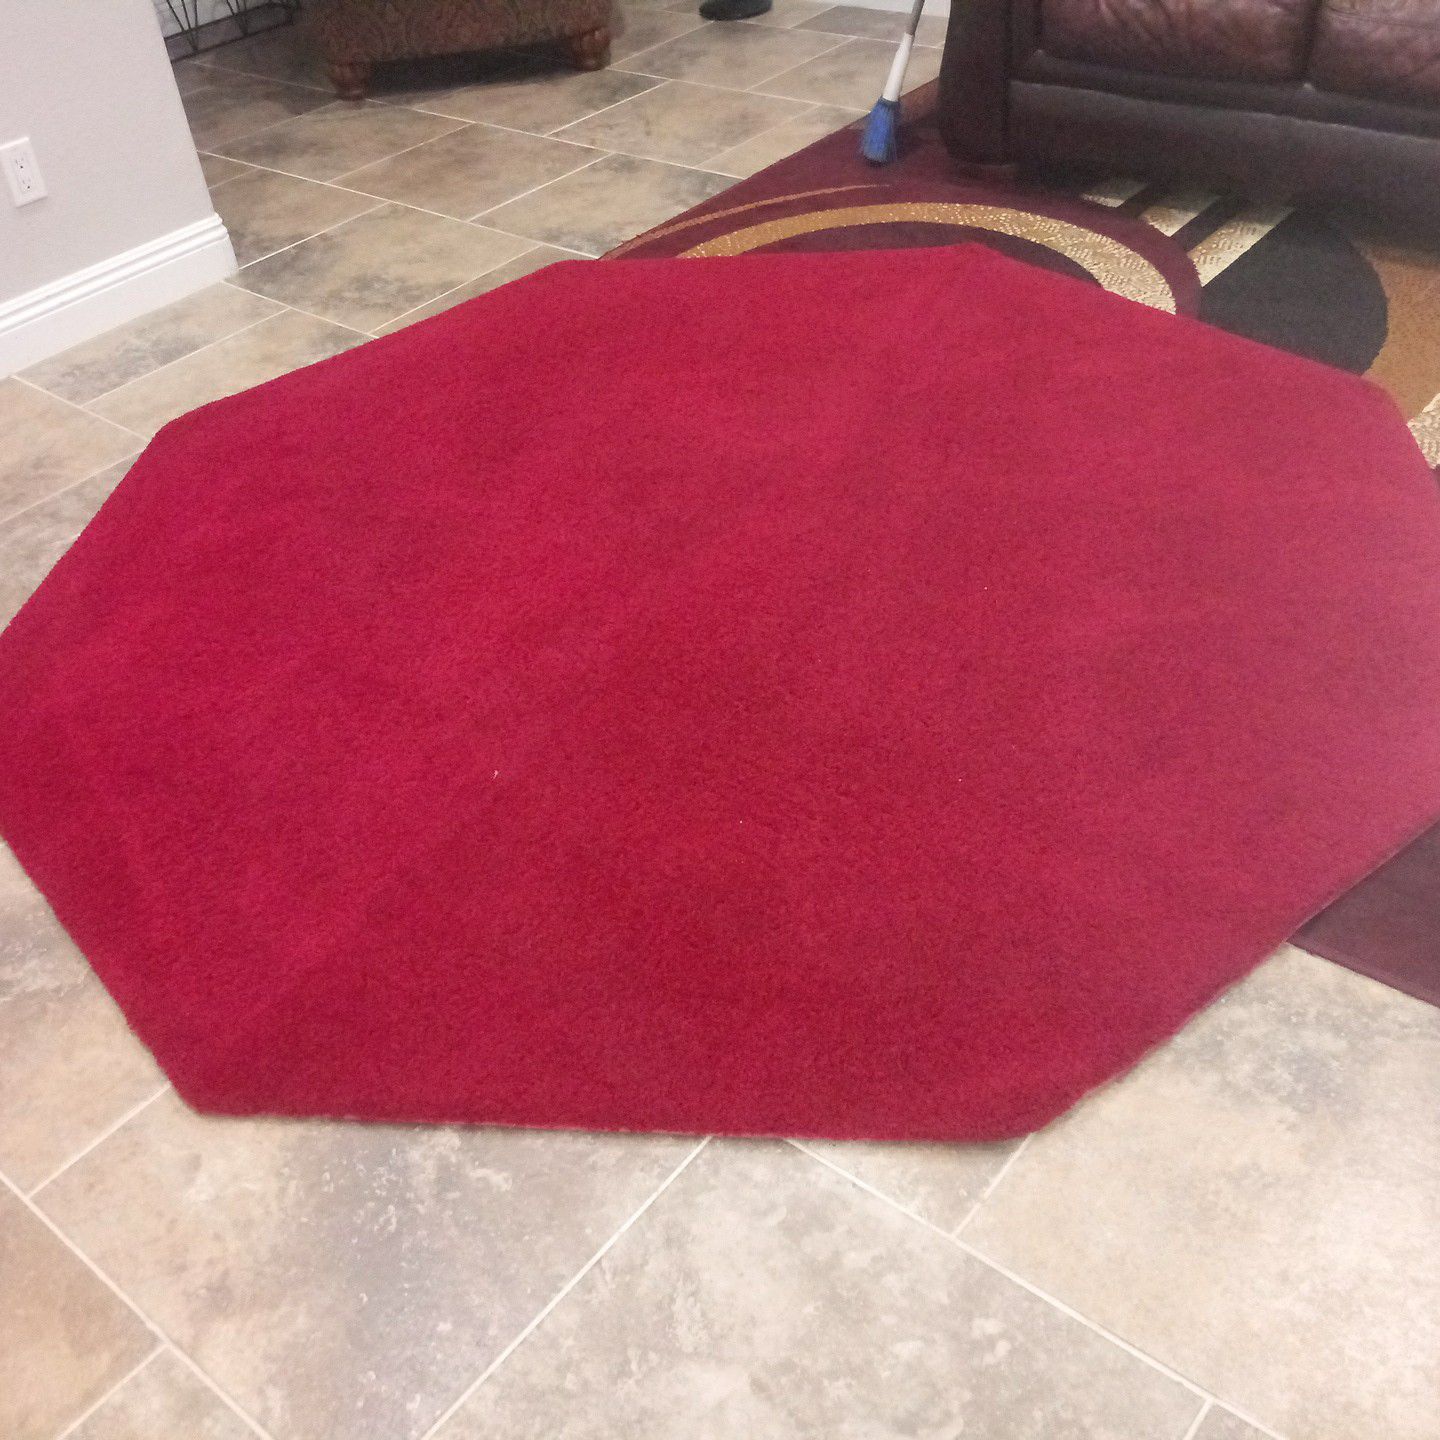 Red area rug